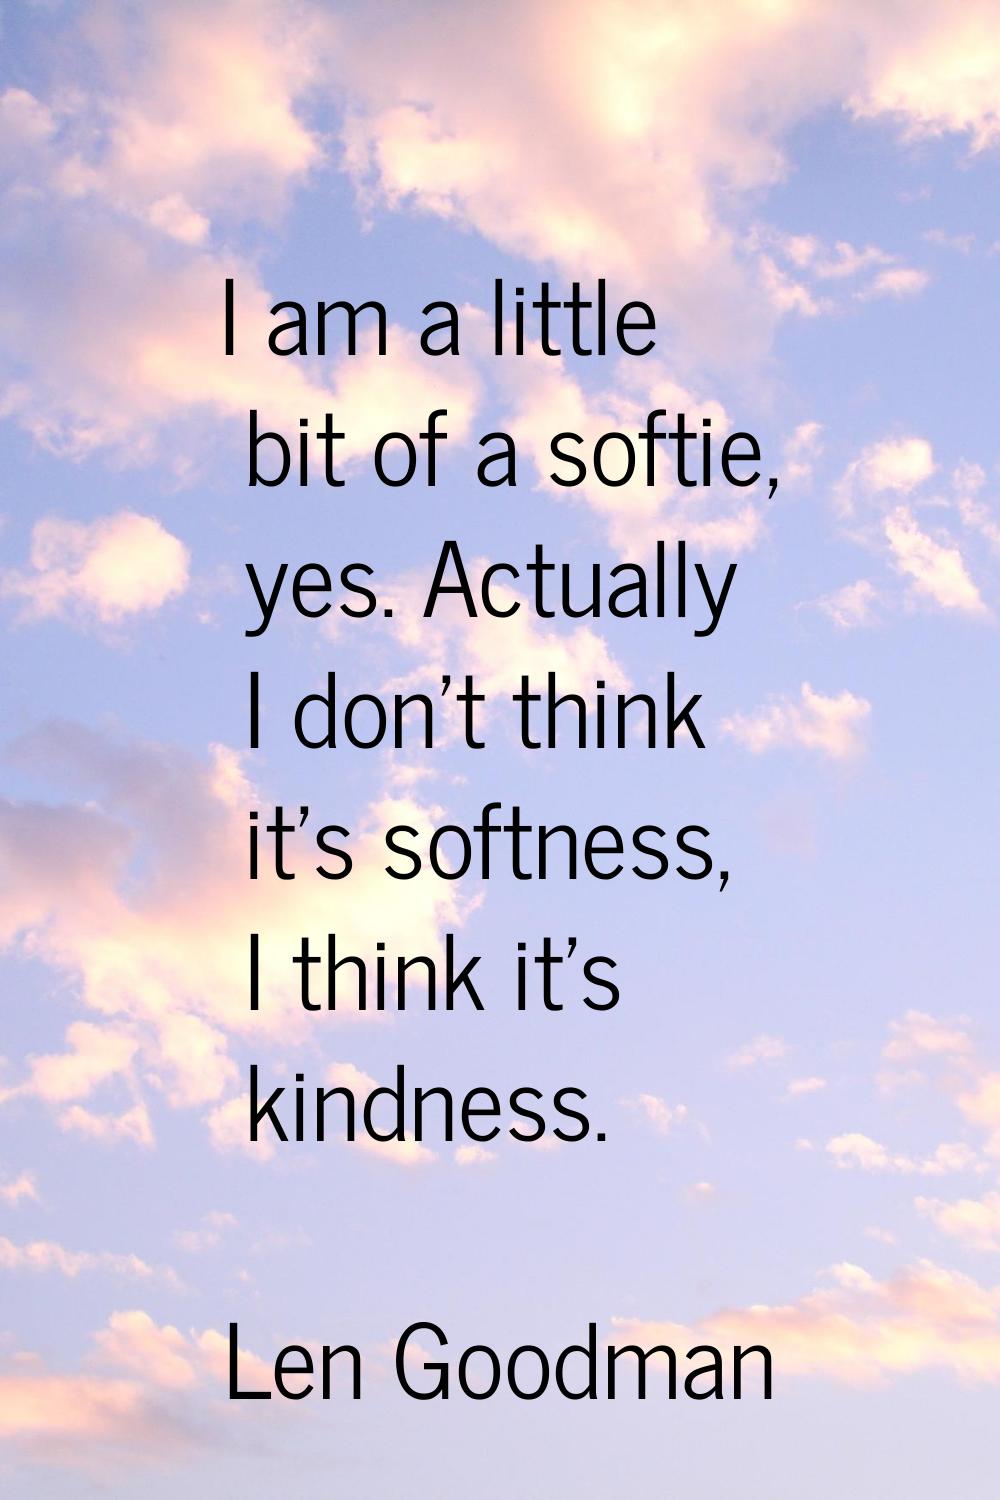 I am a little bit of a softie, yes. Actually I don't think it's softness, I think it's kindness.